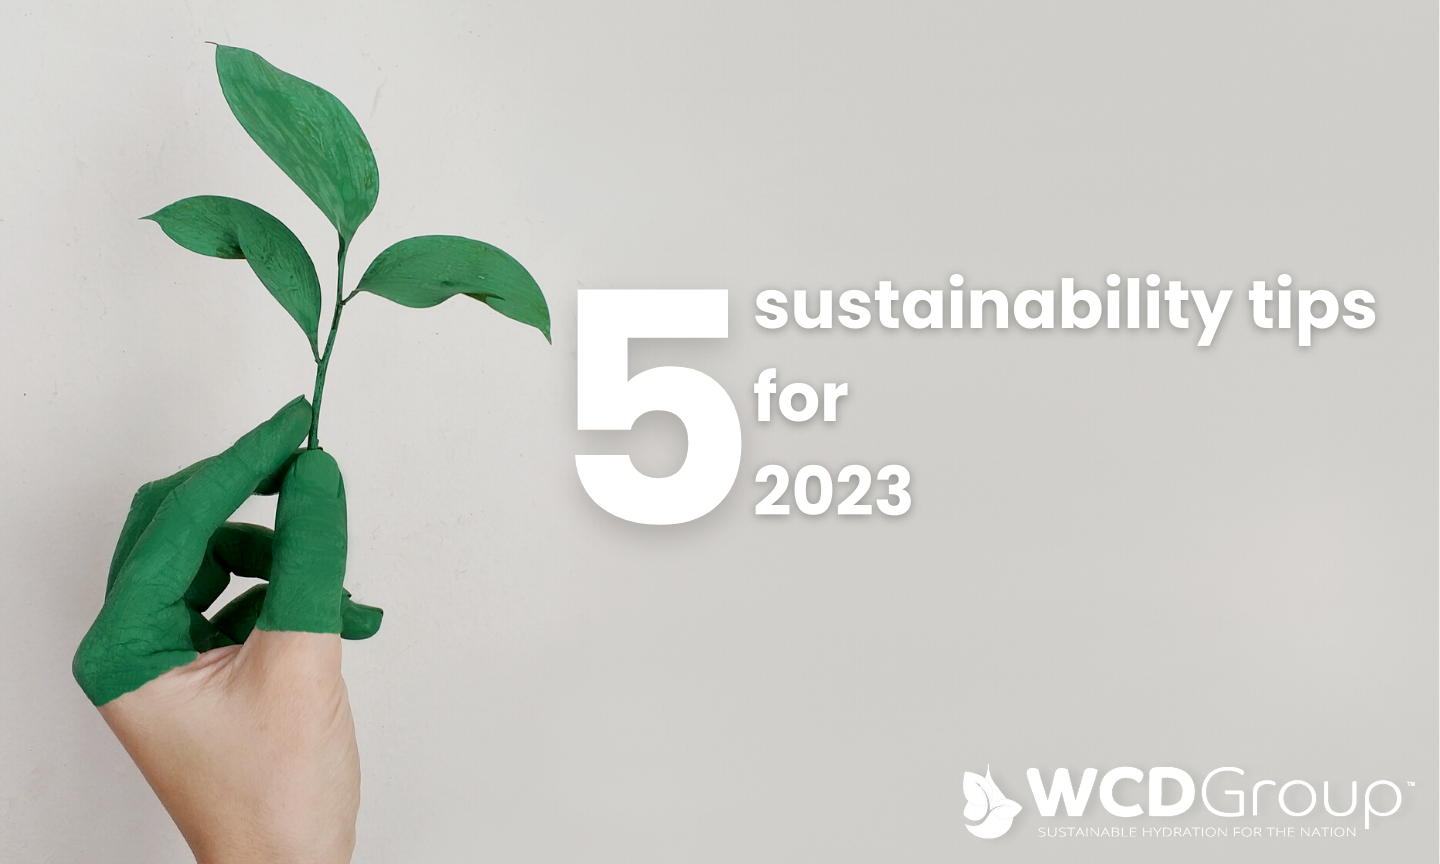 5 sustainability tips for 2023